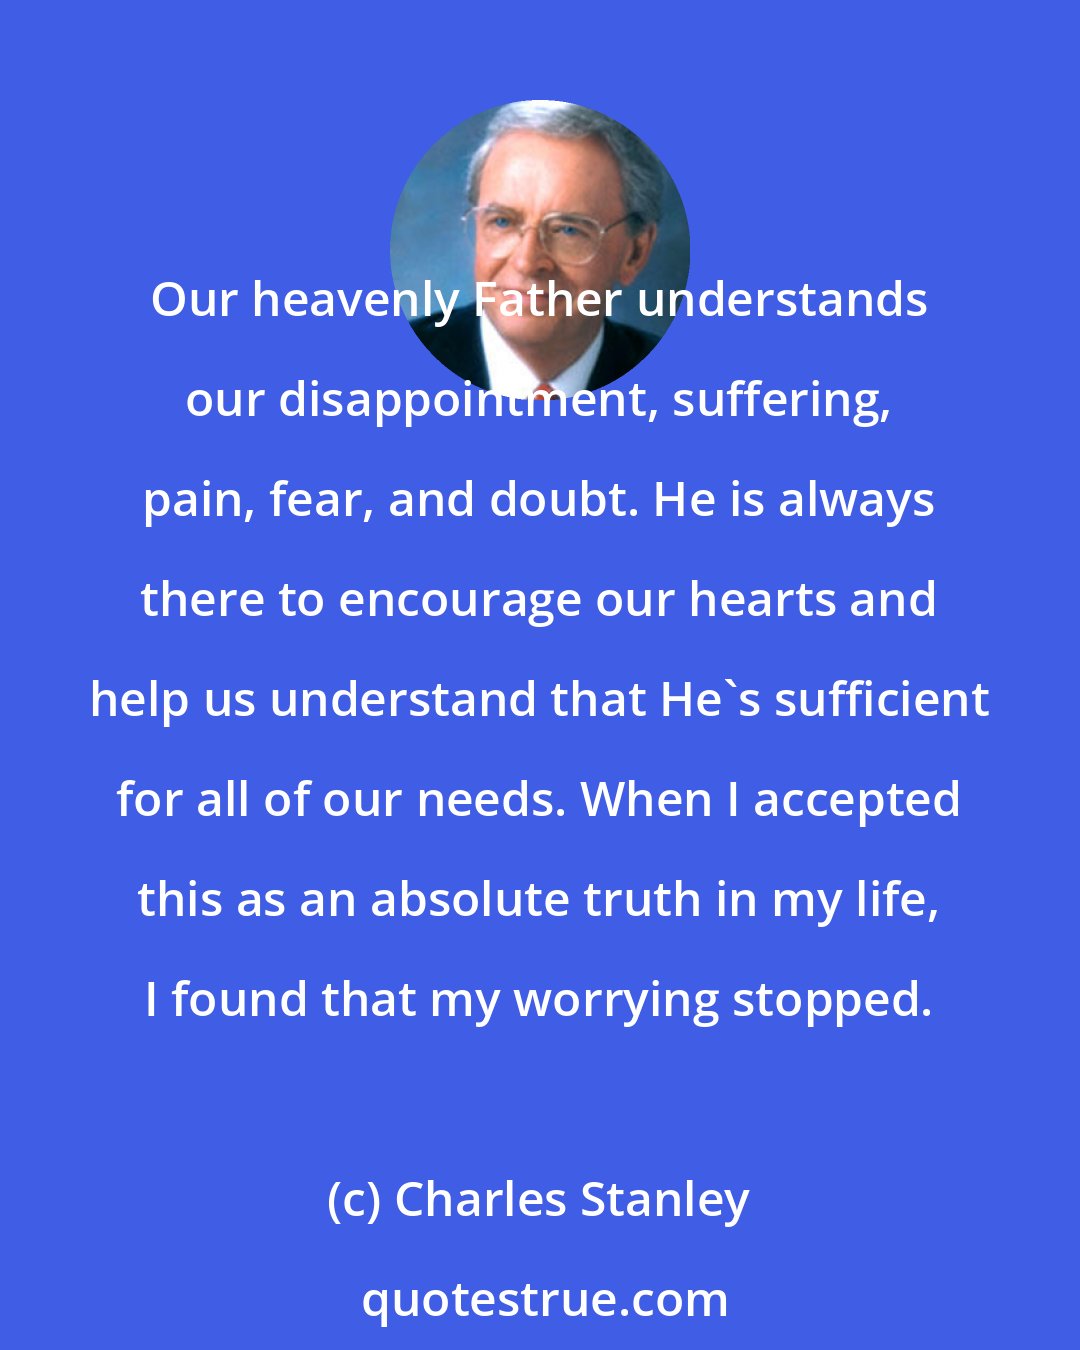 Charles Stanley: Our heavenly Father understands our disappointment, suffering, pain, fear, and doubt. He is always there to encourage our hearts and help us understand that He's sufficient for all of our needs. When I accepted this as an absolute truth in my life, I found that my worrying stopped.